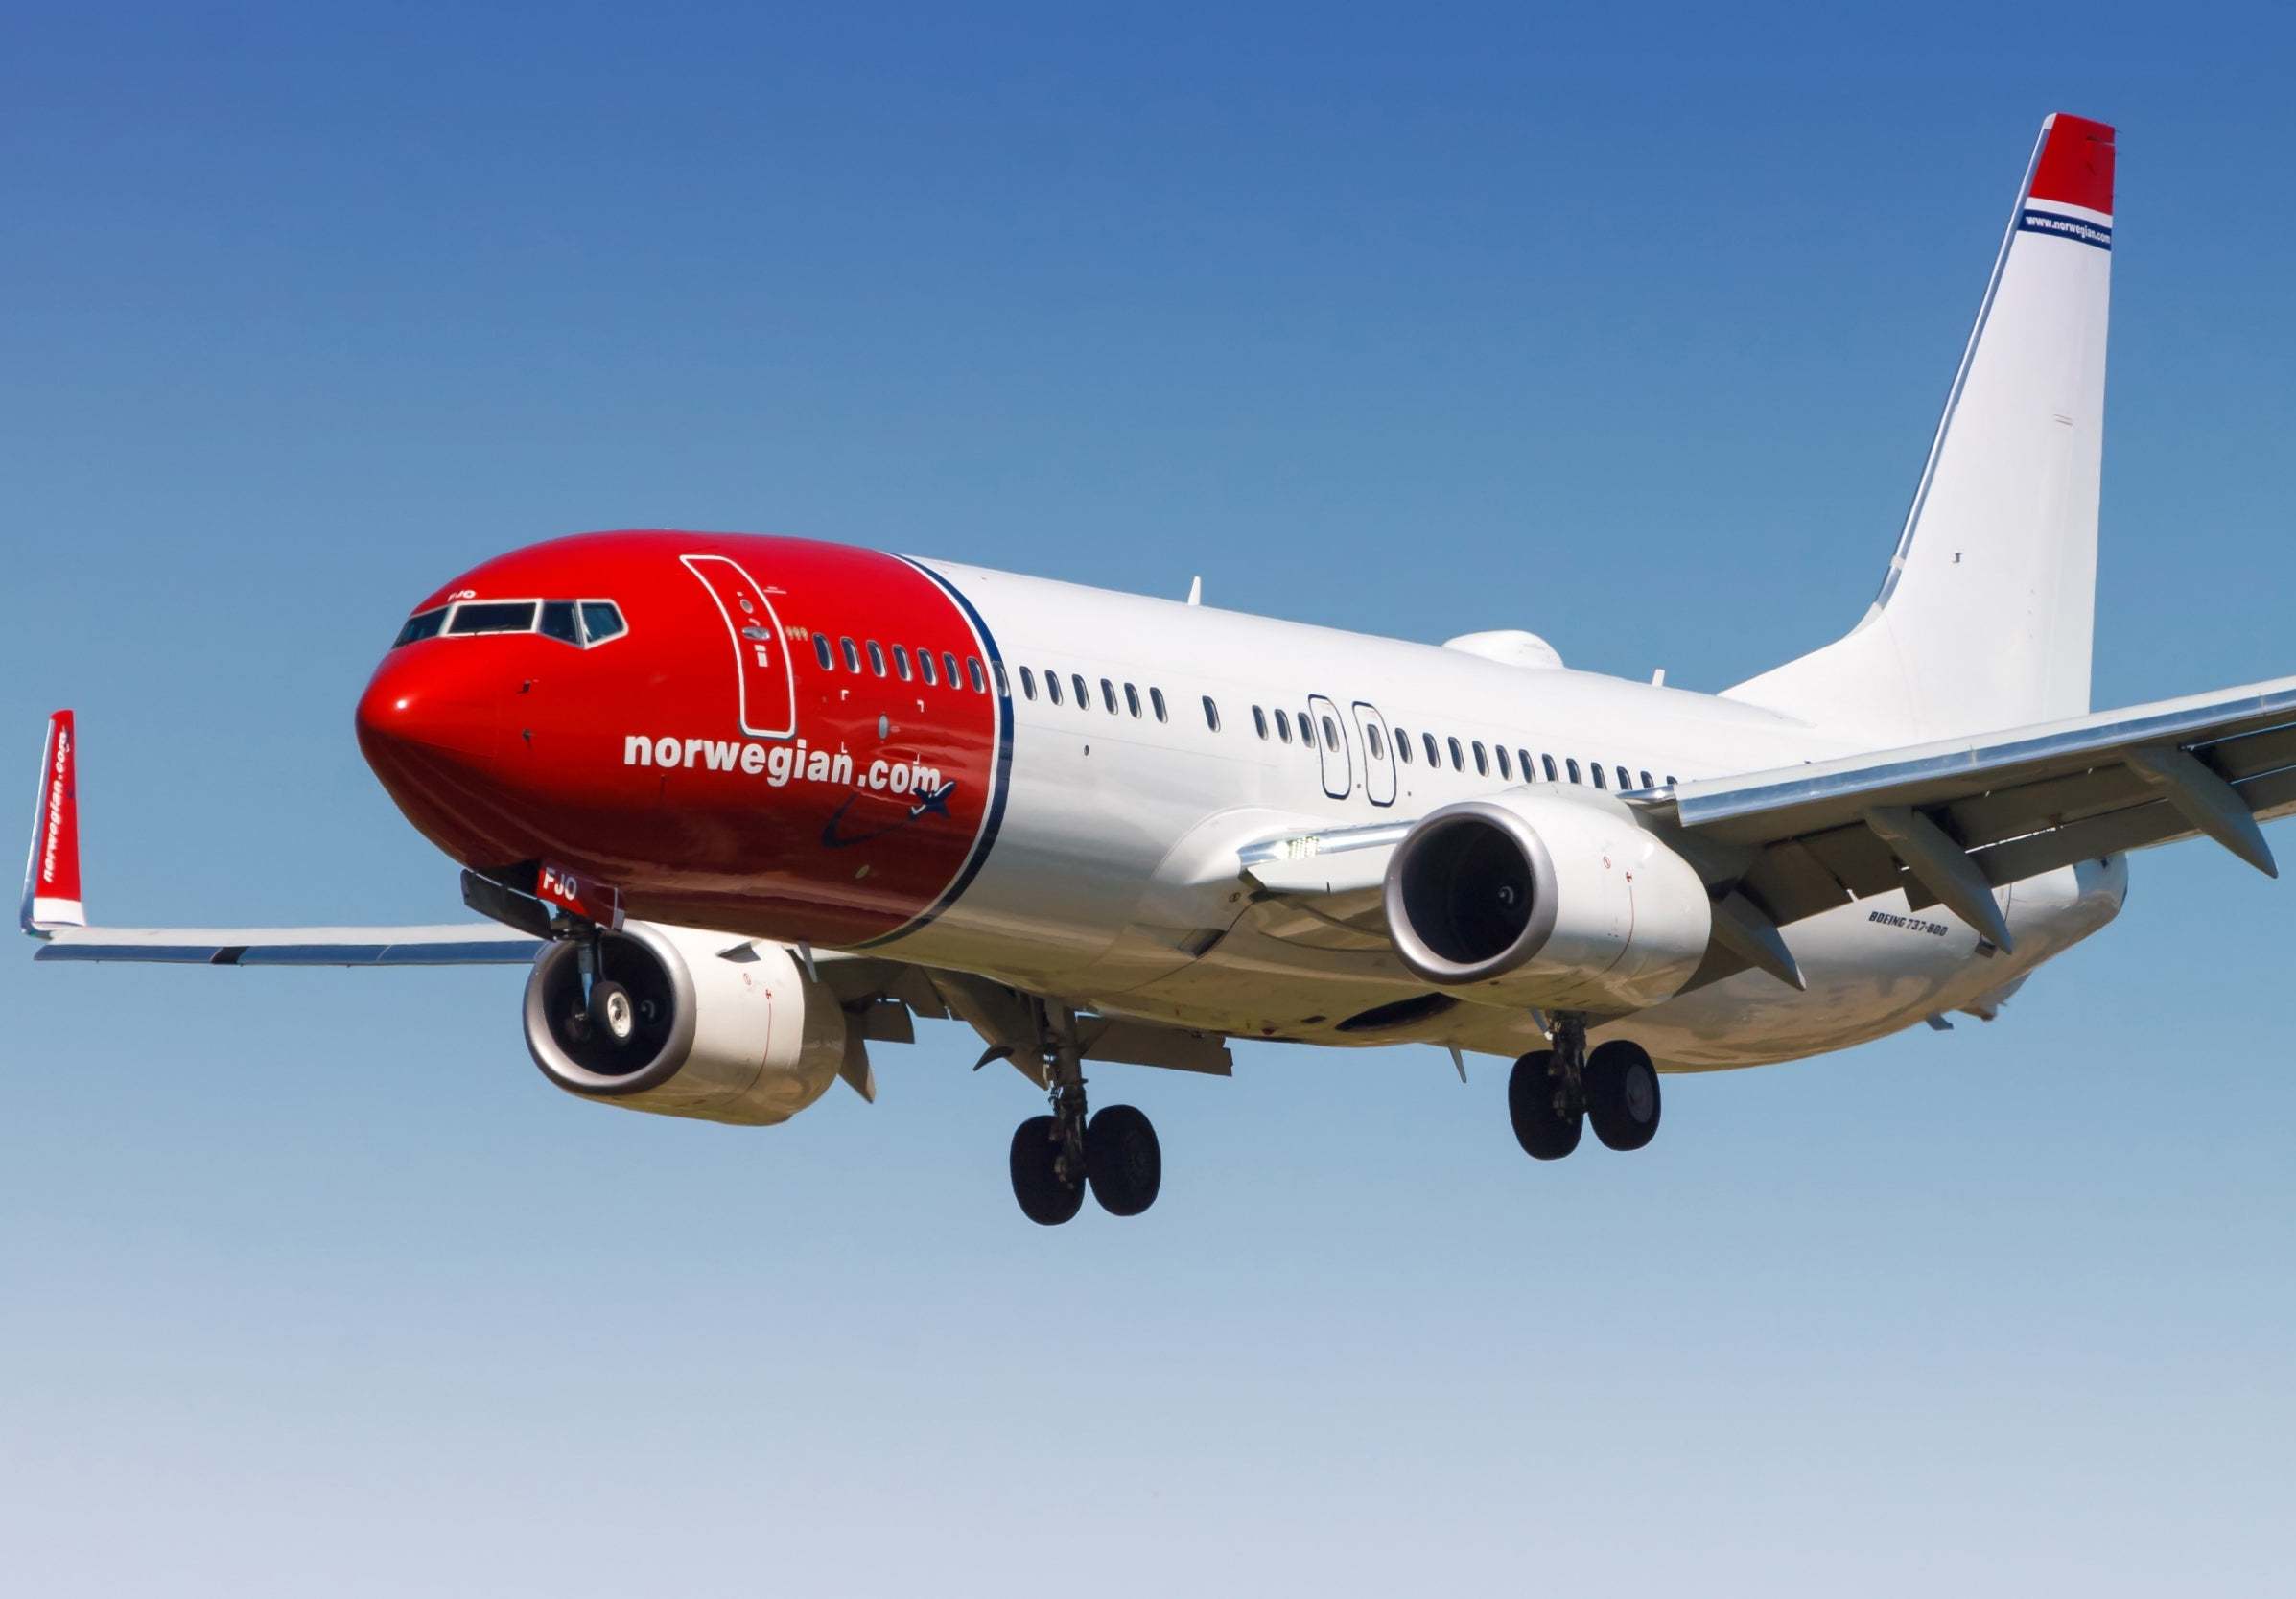 Norwegian has a large base at Gatwick, where it is the third-largest airline behind easyJet and BA